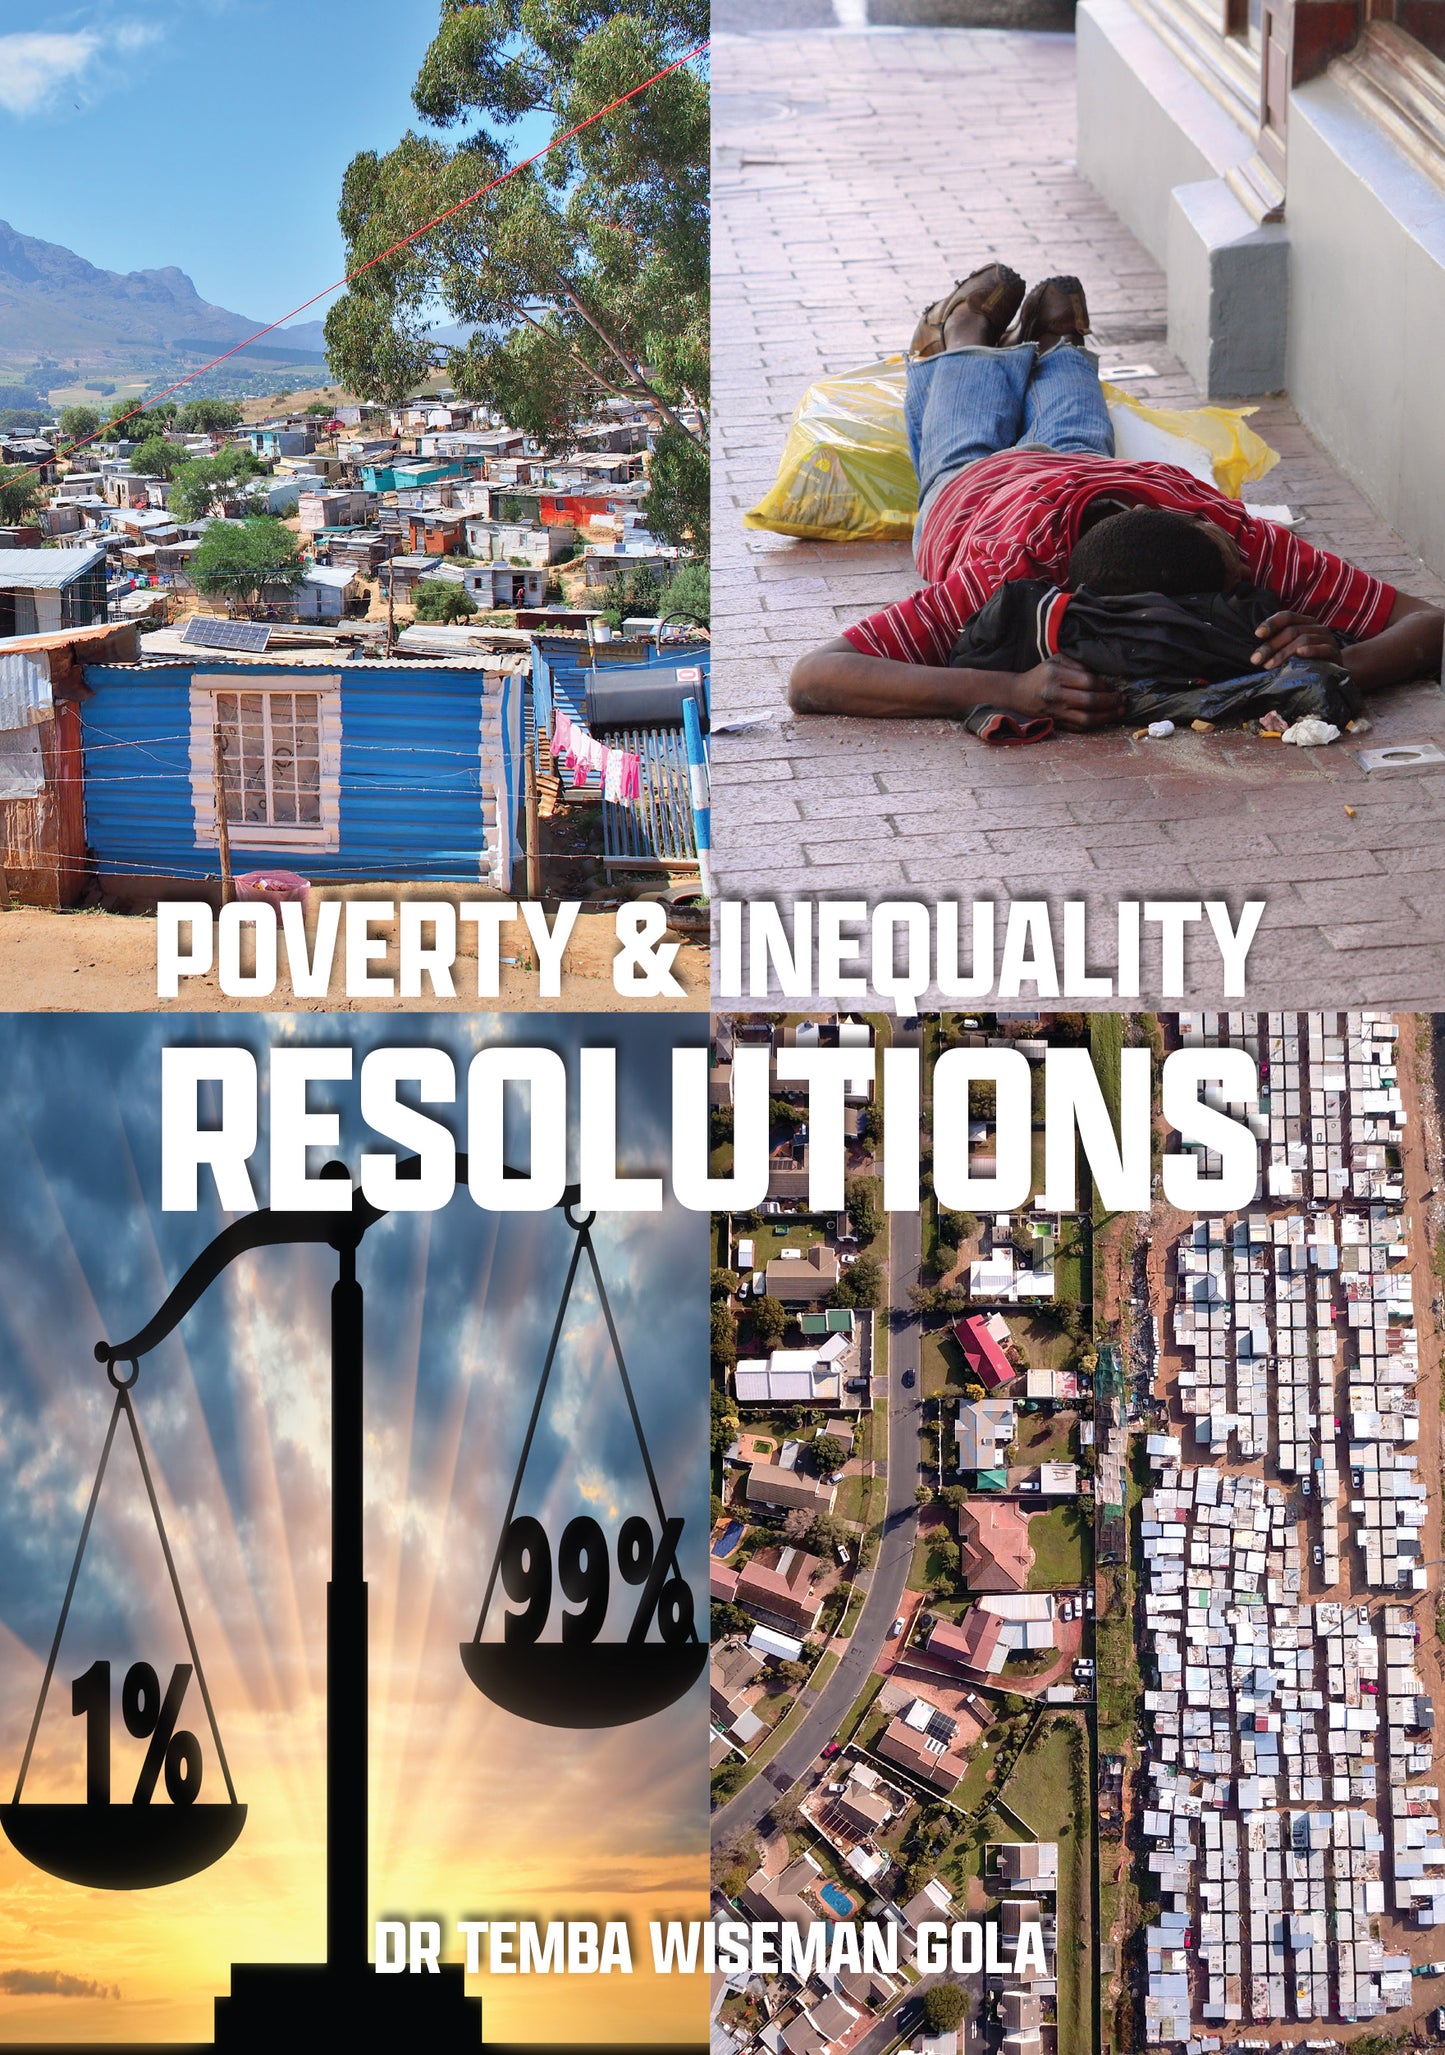 Poverty & Inequality Resolutions